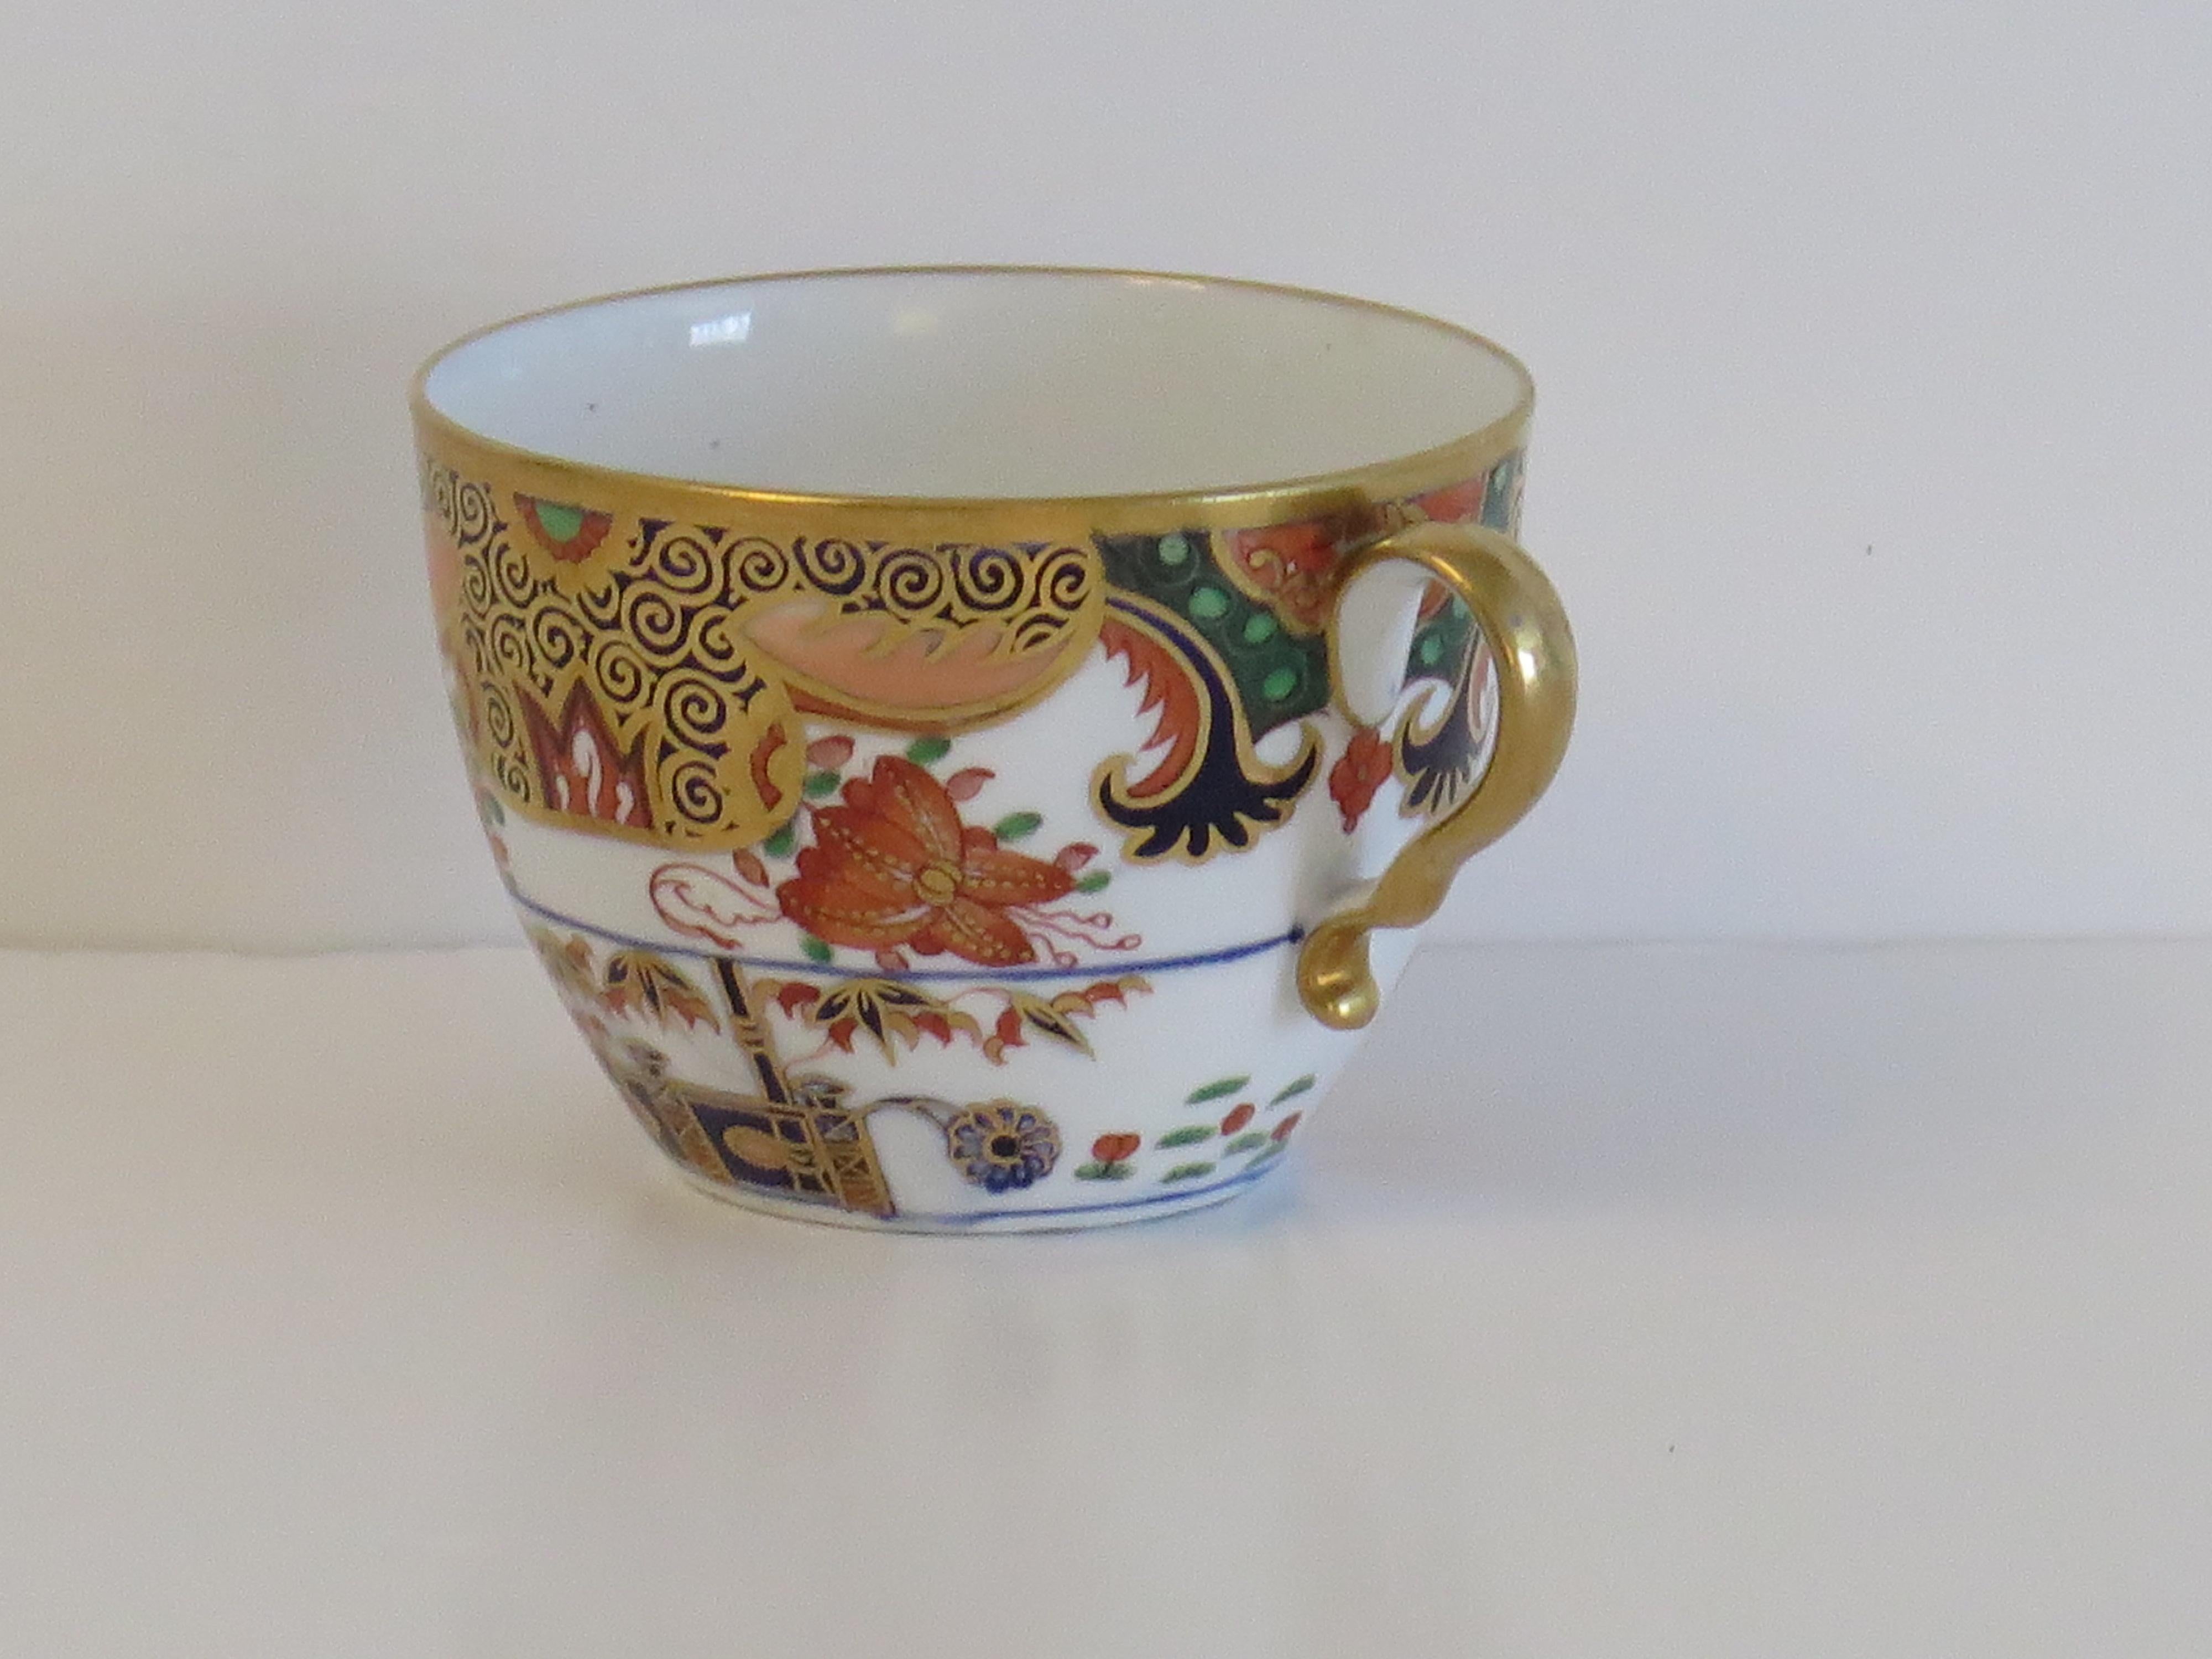 19th Century Spode Porcelain Tea Cup in Hand Painted & Gilded Pattern 967, circa 1810 For Sale